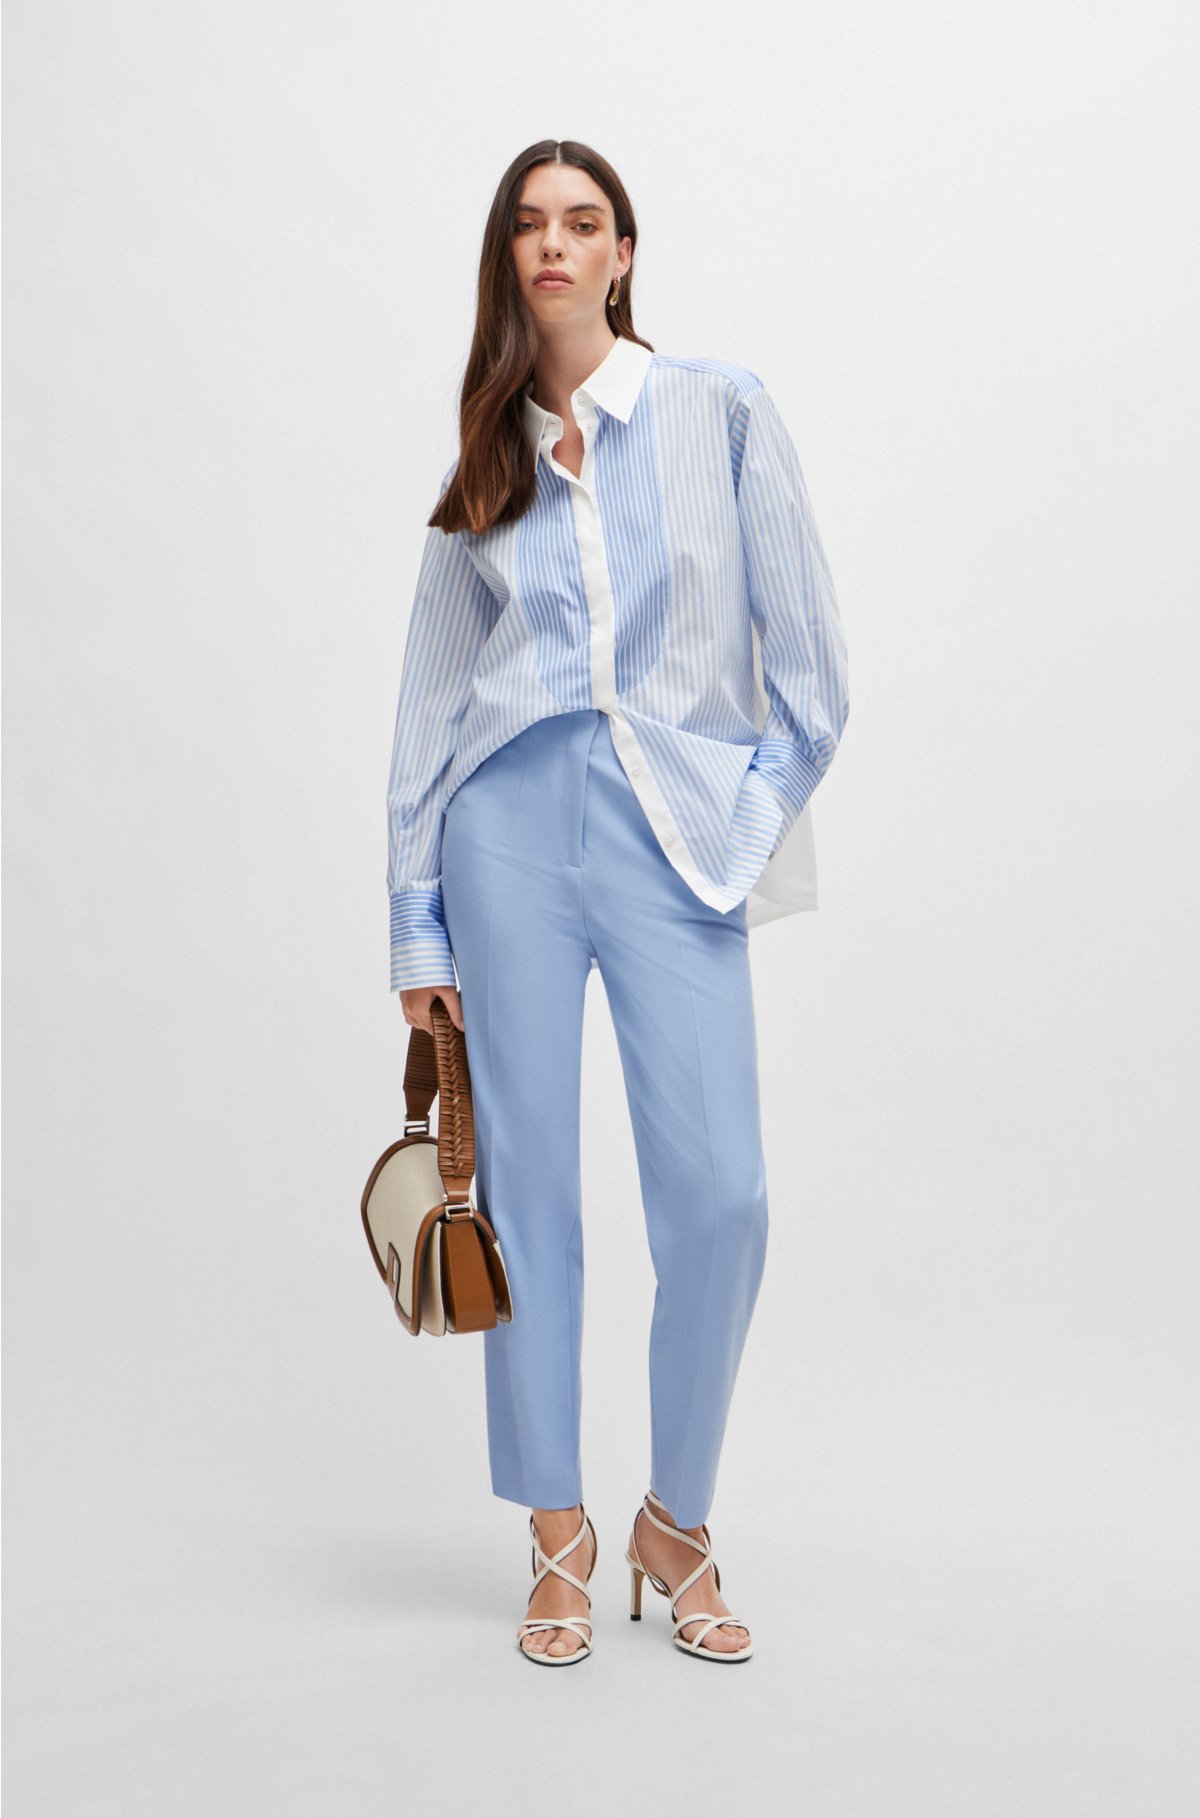 Relaxed-fit trousers in stretch fabric, Light Blue